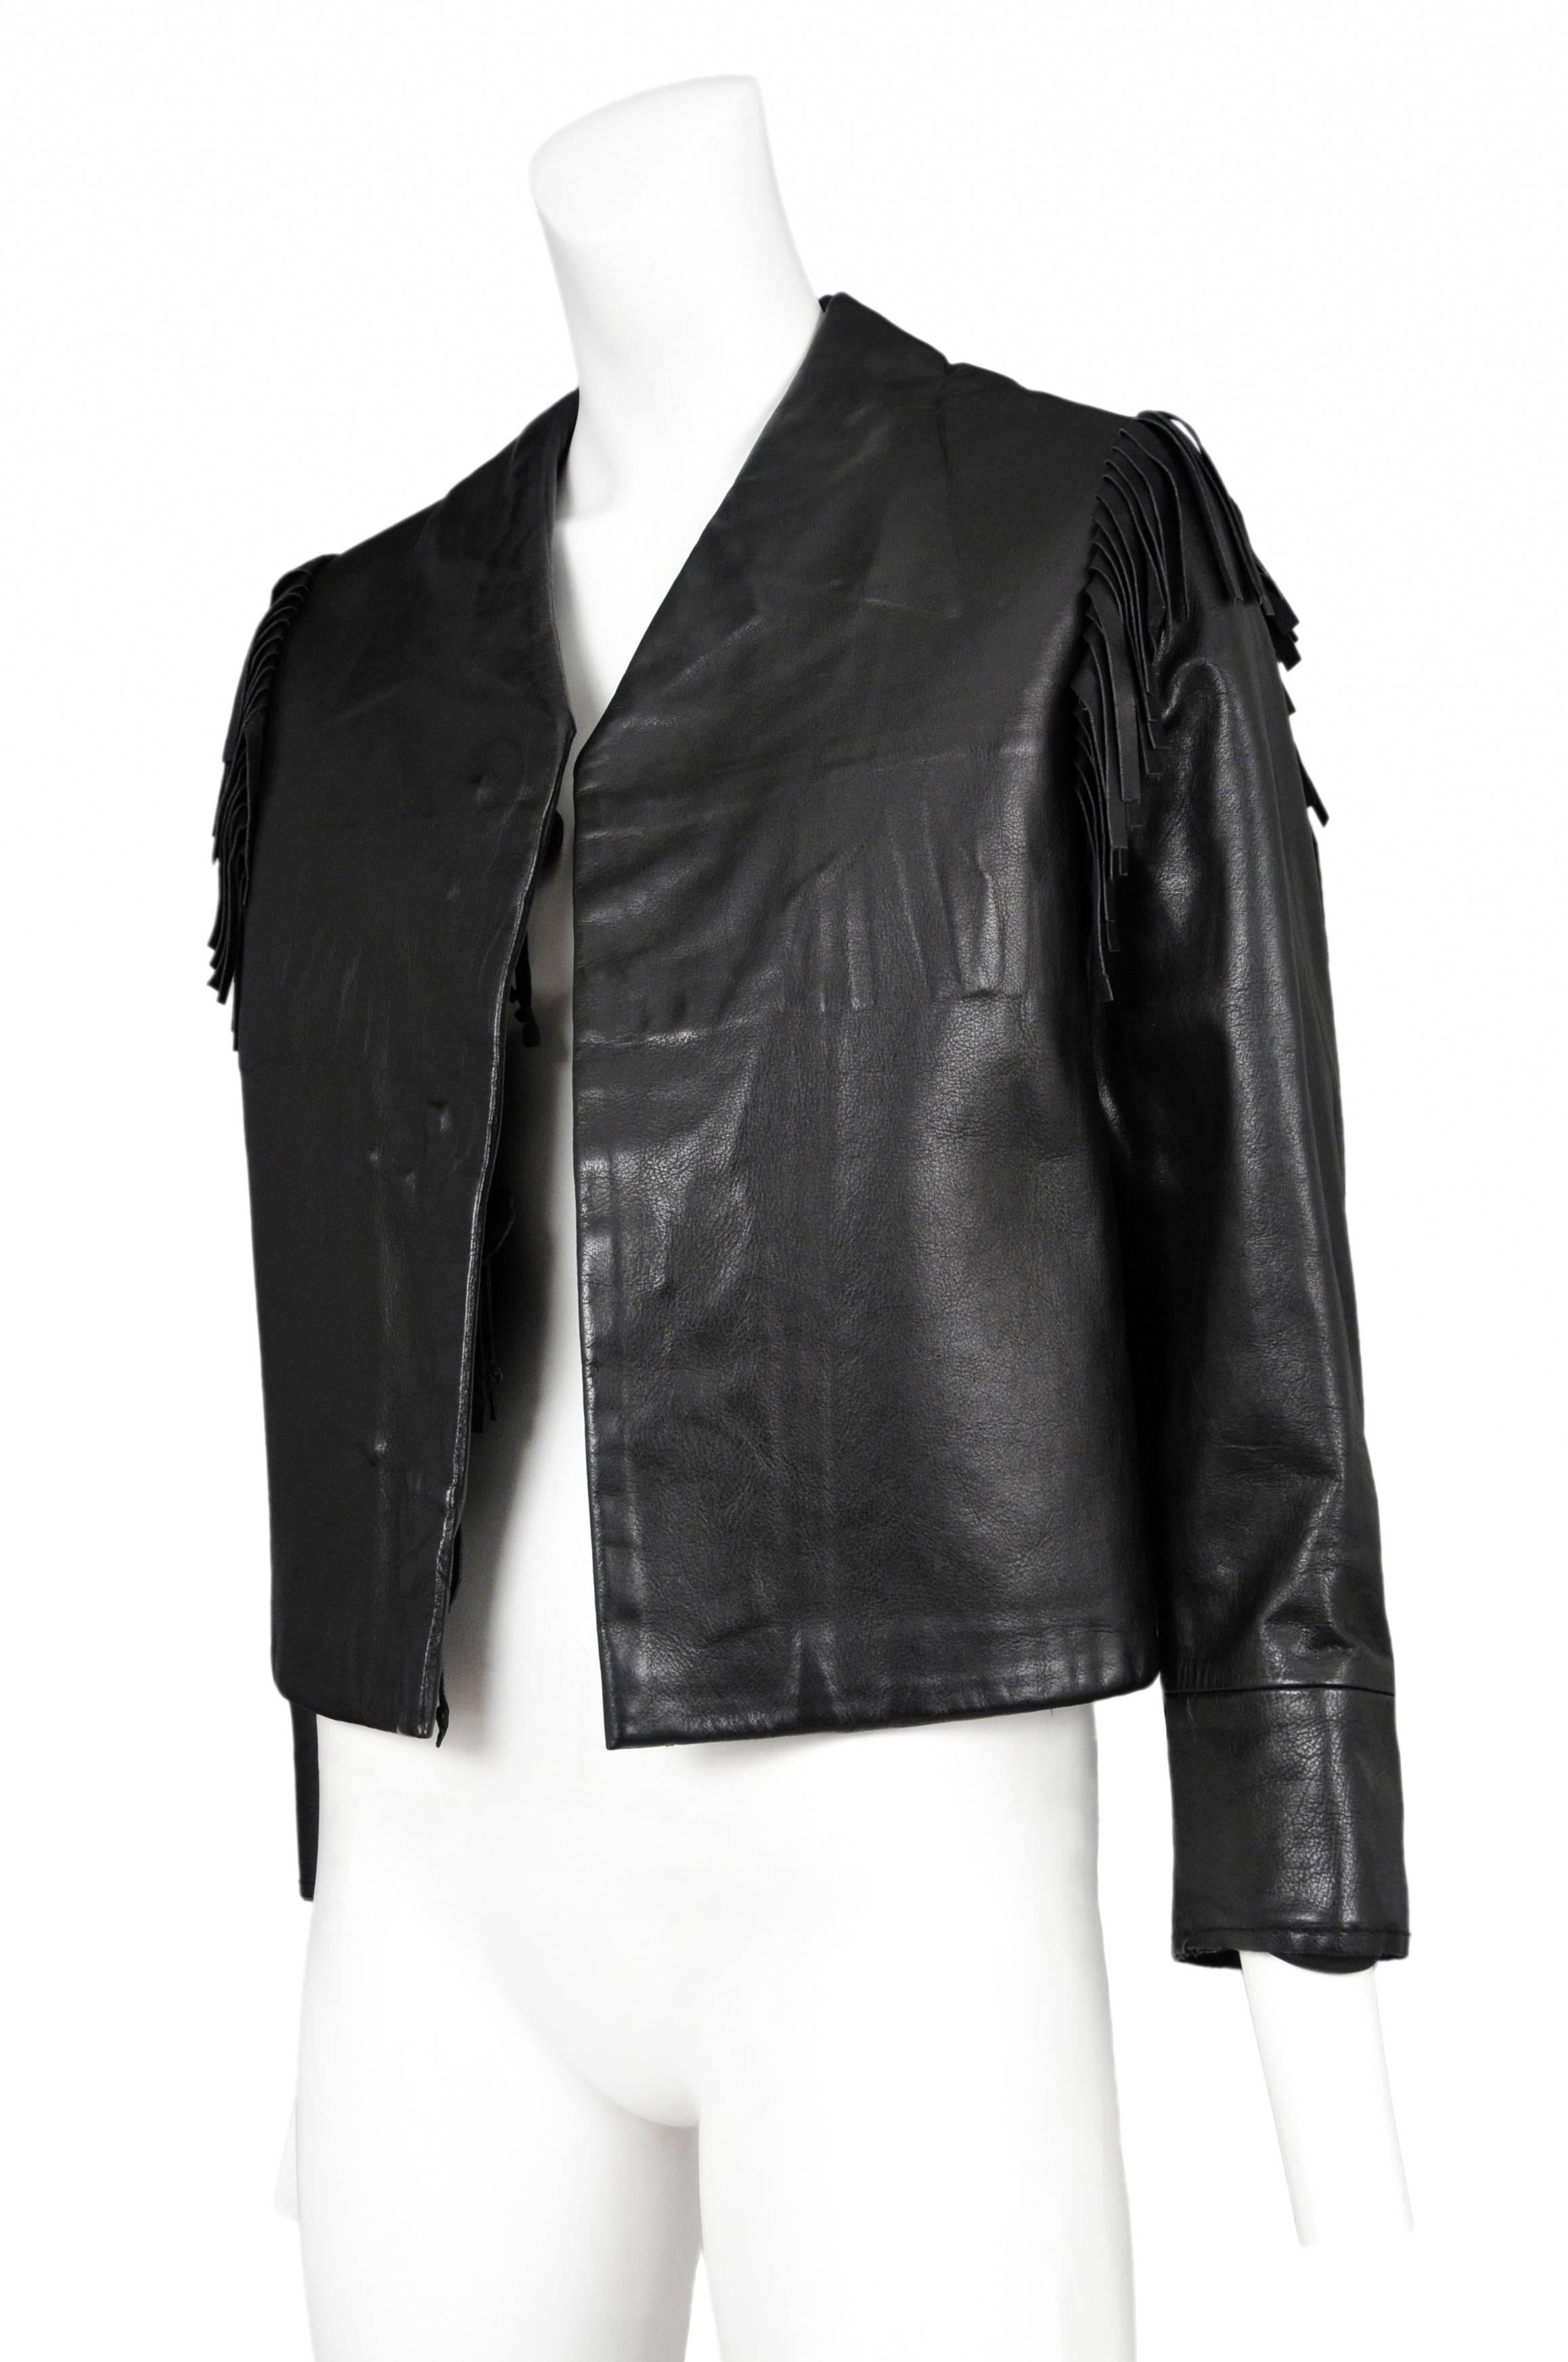 Vintage Maison Martin Margiela black leather jacket with details sewn inside of garment. Collar and buttons are sewn inside the face of the jacket. Fringe at back and on arms. Black lining. Circa 2000's.

Please inquire for additional images.